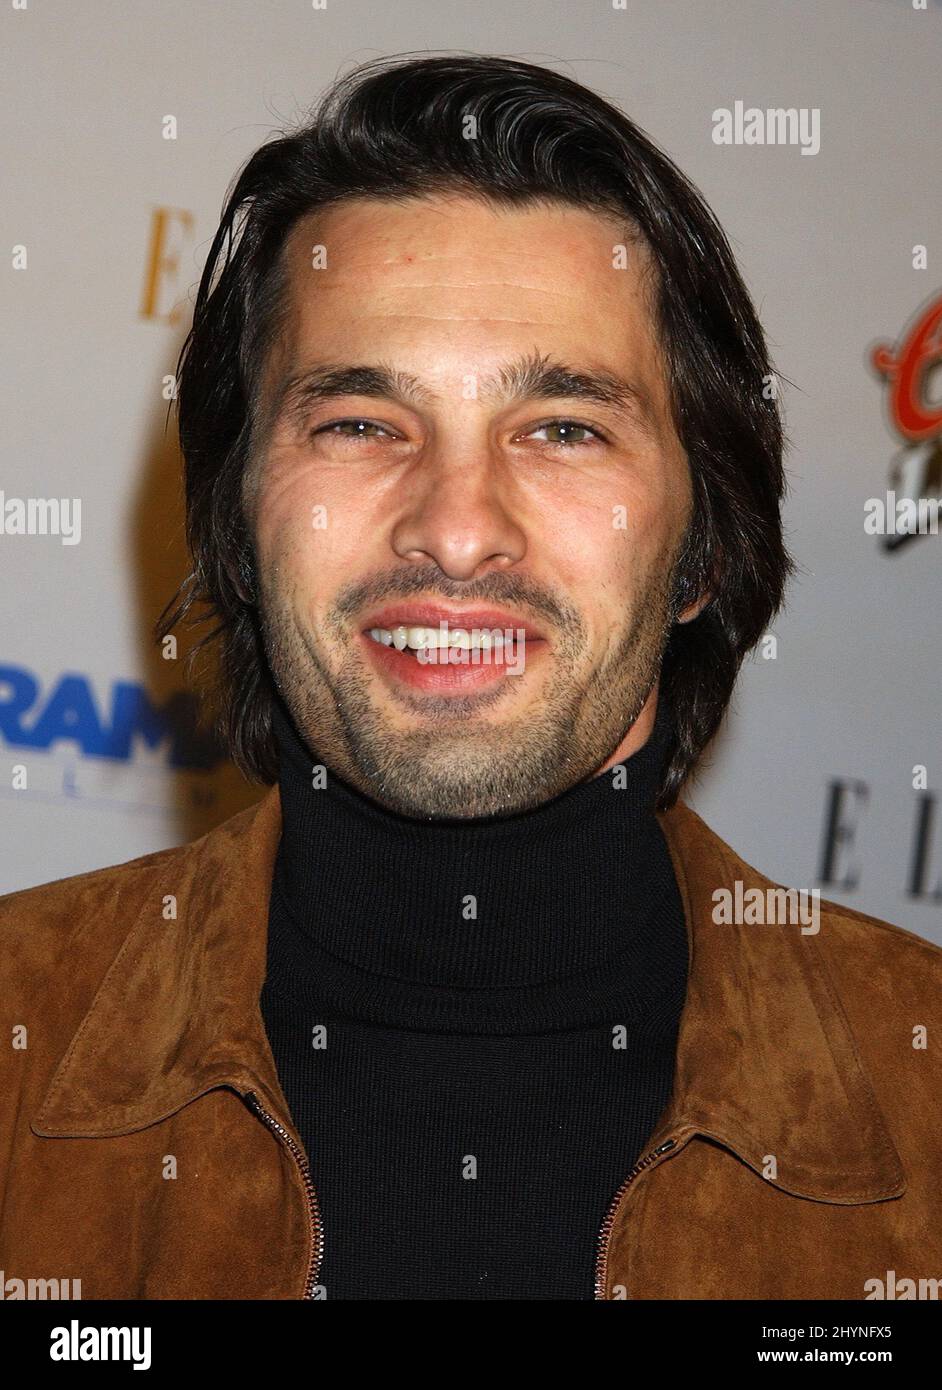 OLIVIER MARTINEZ ATTENDS THE 'CHICAGO' PREMIERE AT THE ACADEMY THEATRE, BEVERLY HILLS. PICTURE: UK PRESS Stock Photo